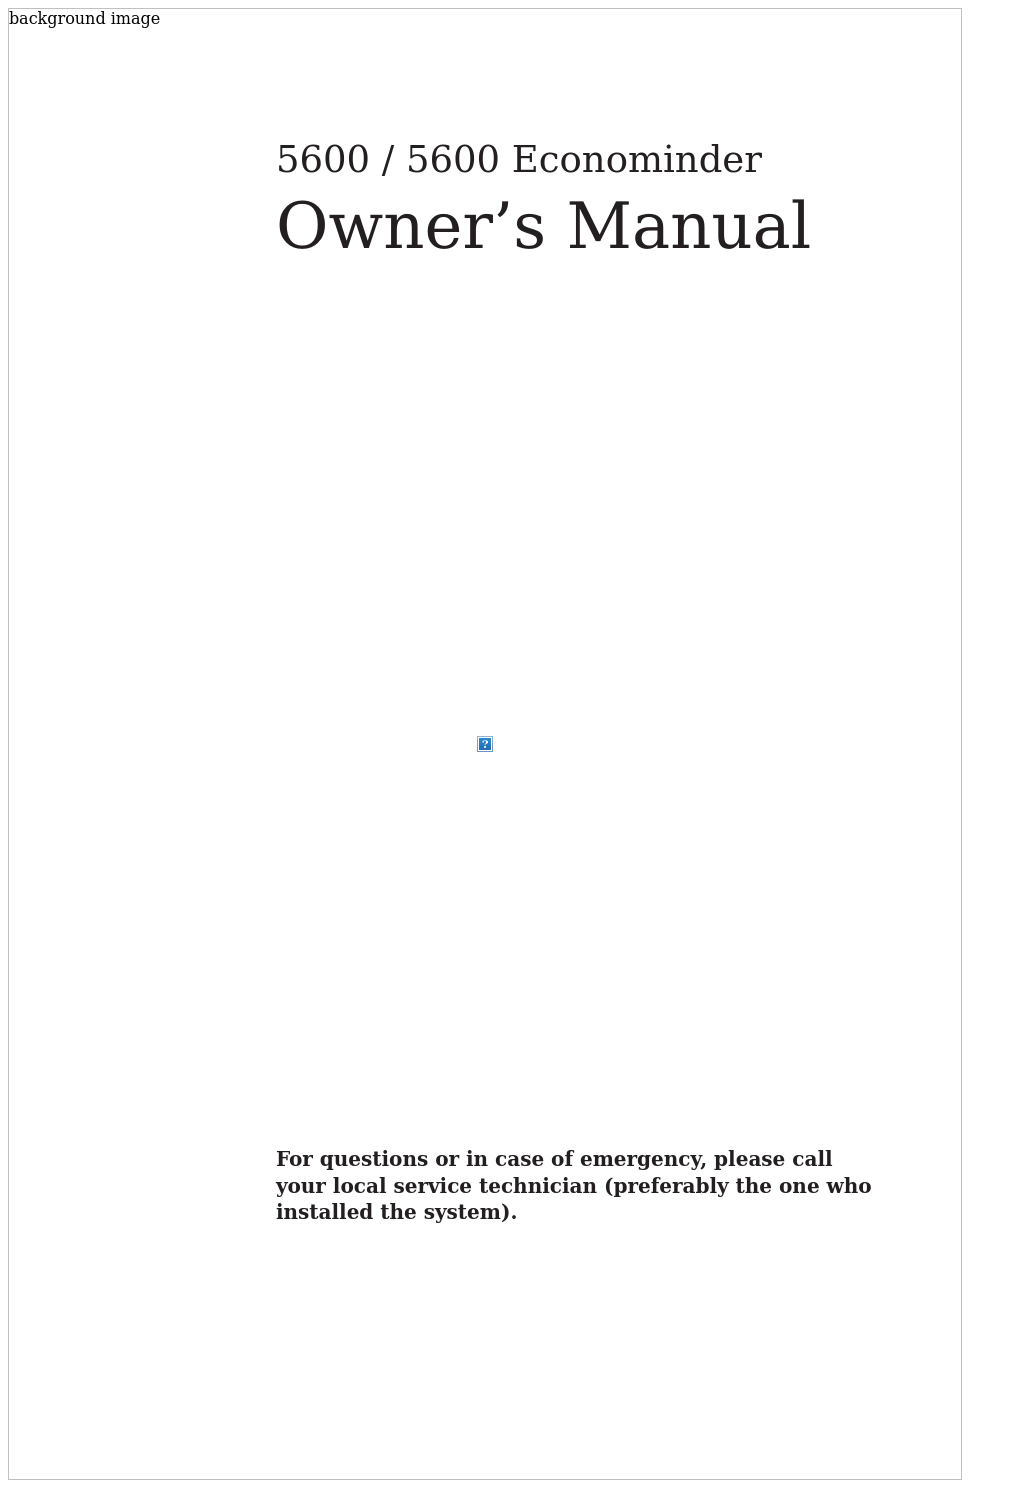 5600 Econominder Owners Manual